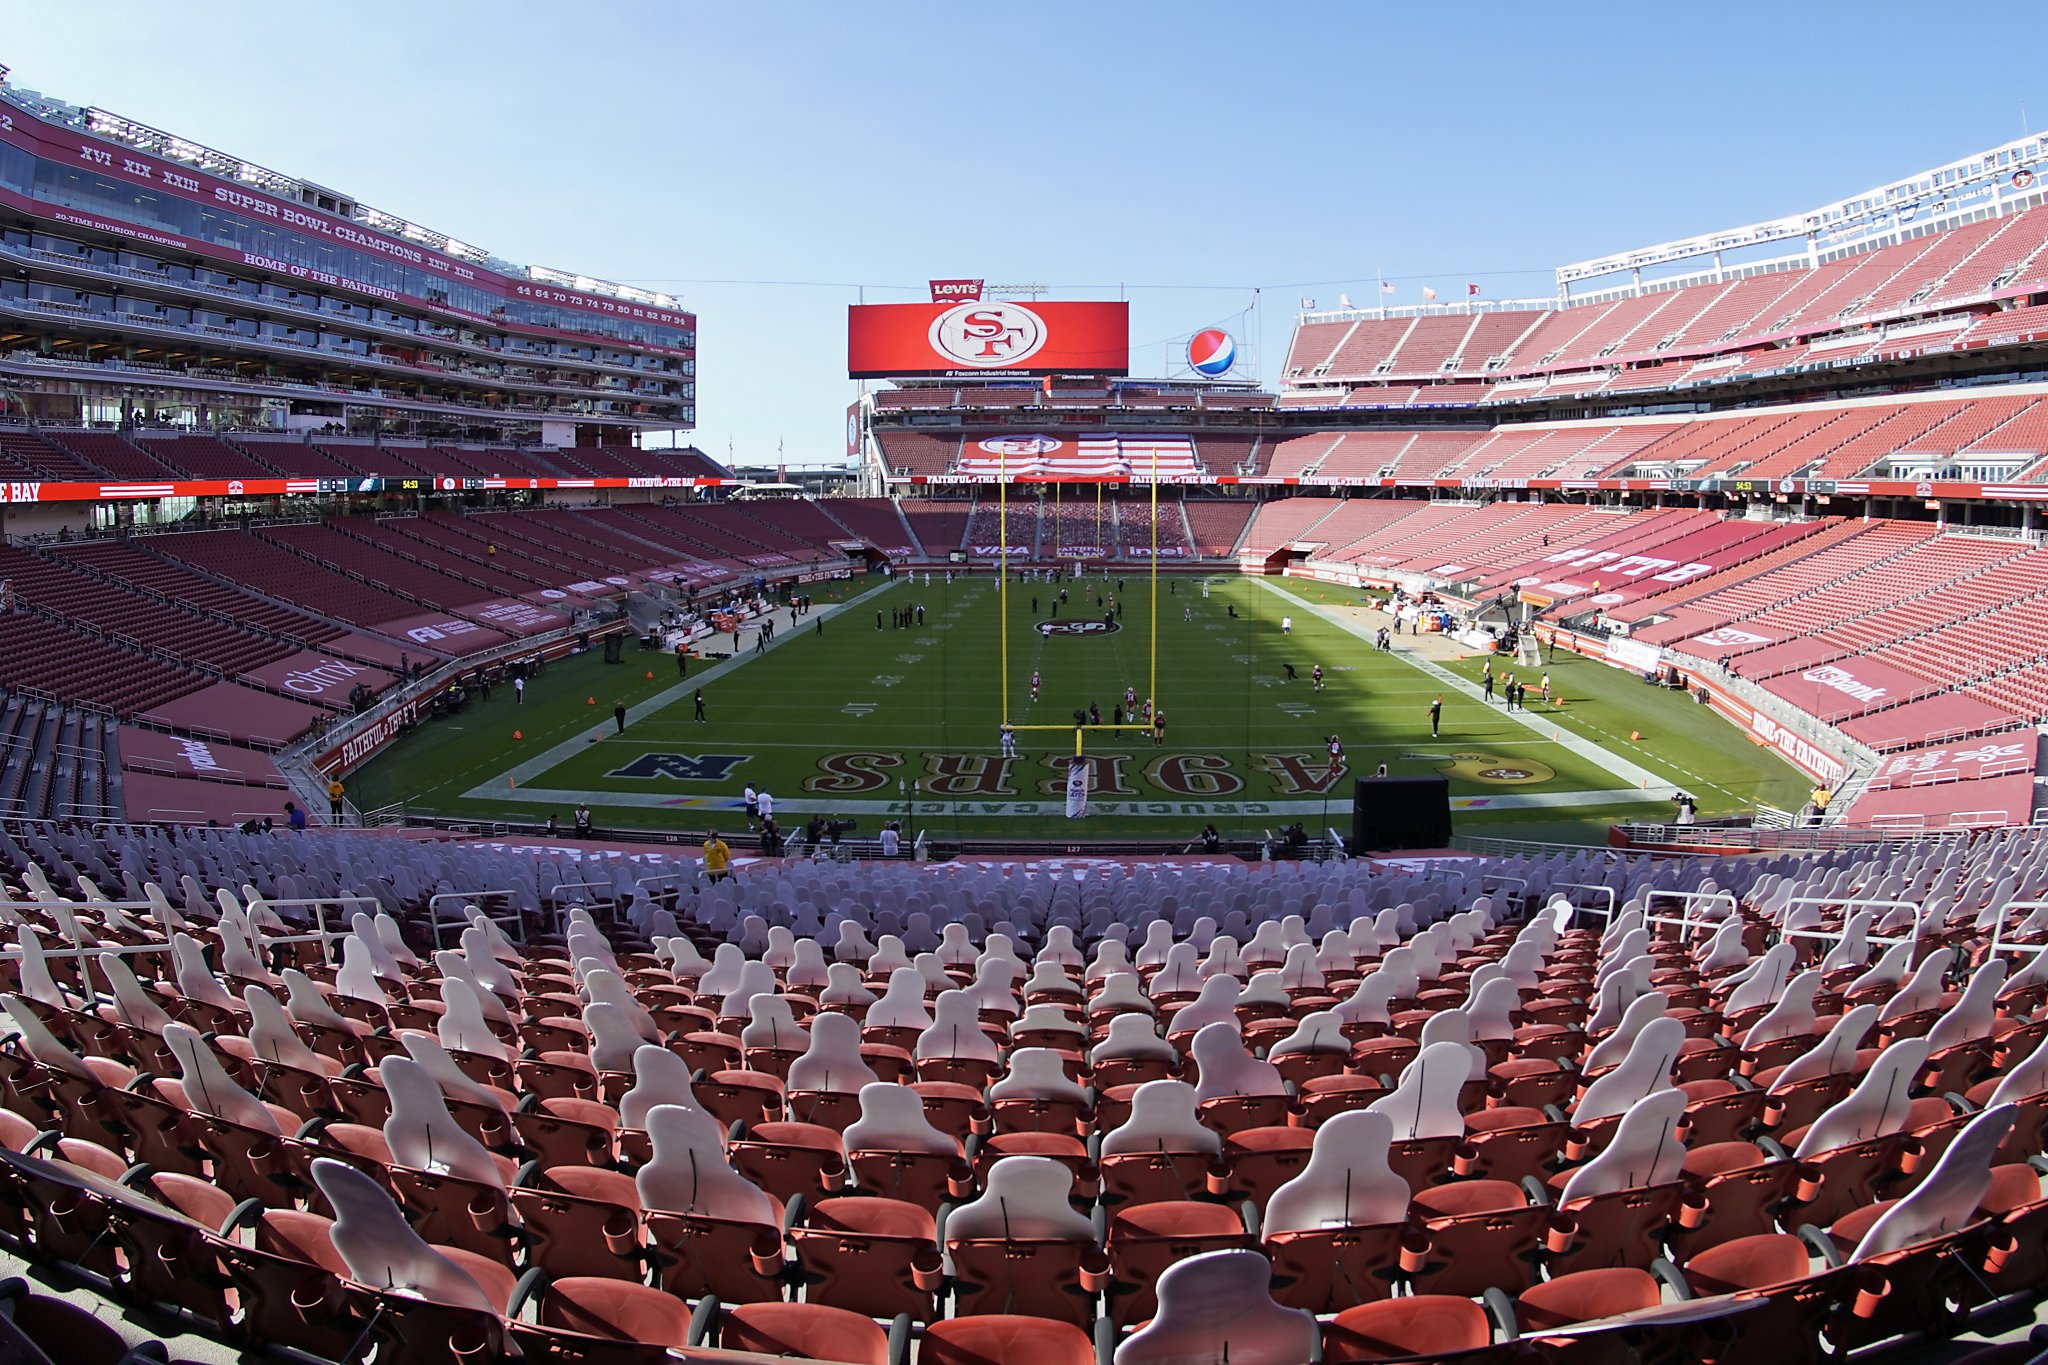 Actualizar 73+ imagen where did the 49ers play before levi’s stadium